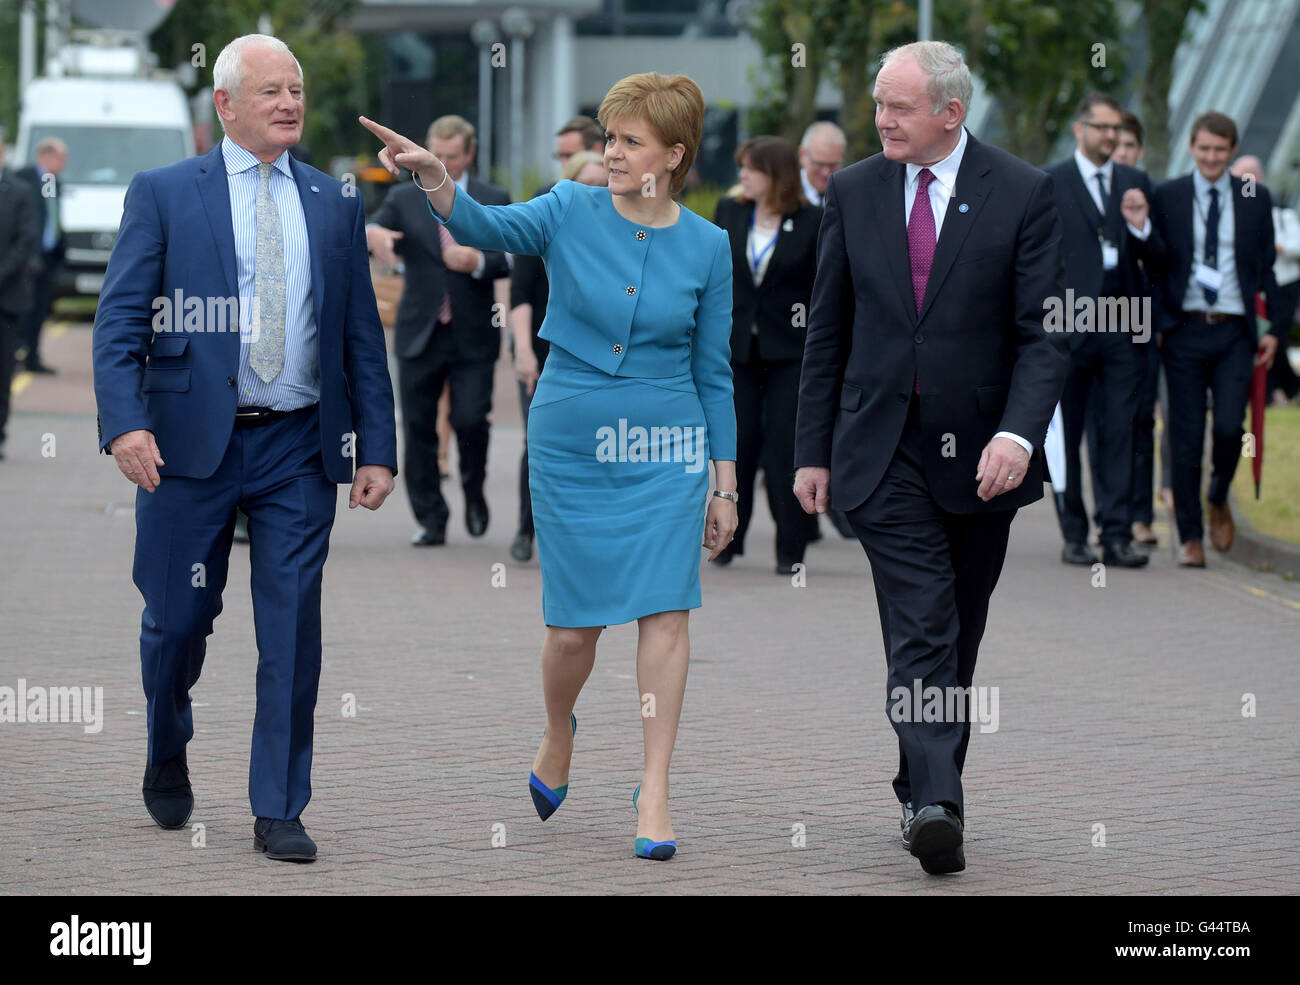 (From the left) Allan Bell Chief Minister Isle of Man, Nicola Sturgeon First Minister of Scotland, and Martin McGuinness deputy First Minister Northern Ireland during the British-Irish Council Summit meeting hosted by the Scottish Government in Glasgow. Stock Photo